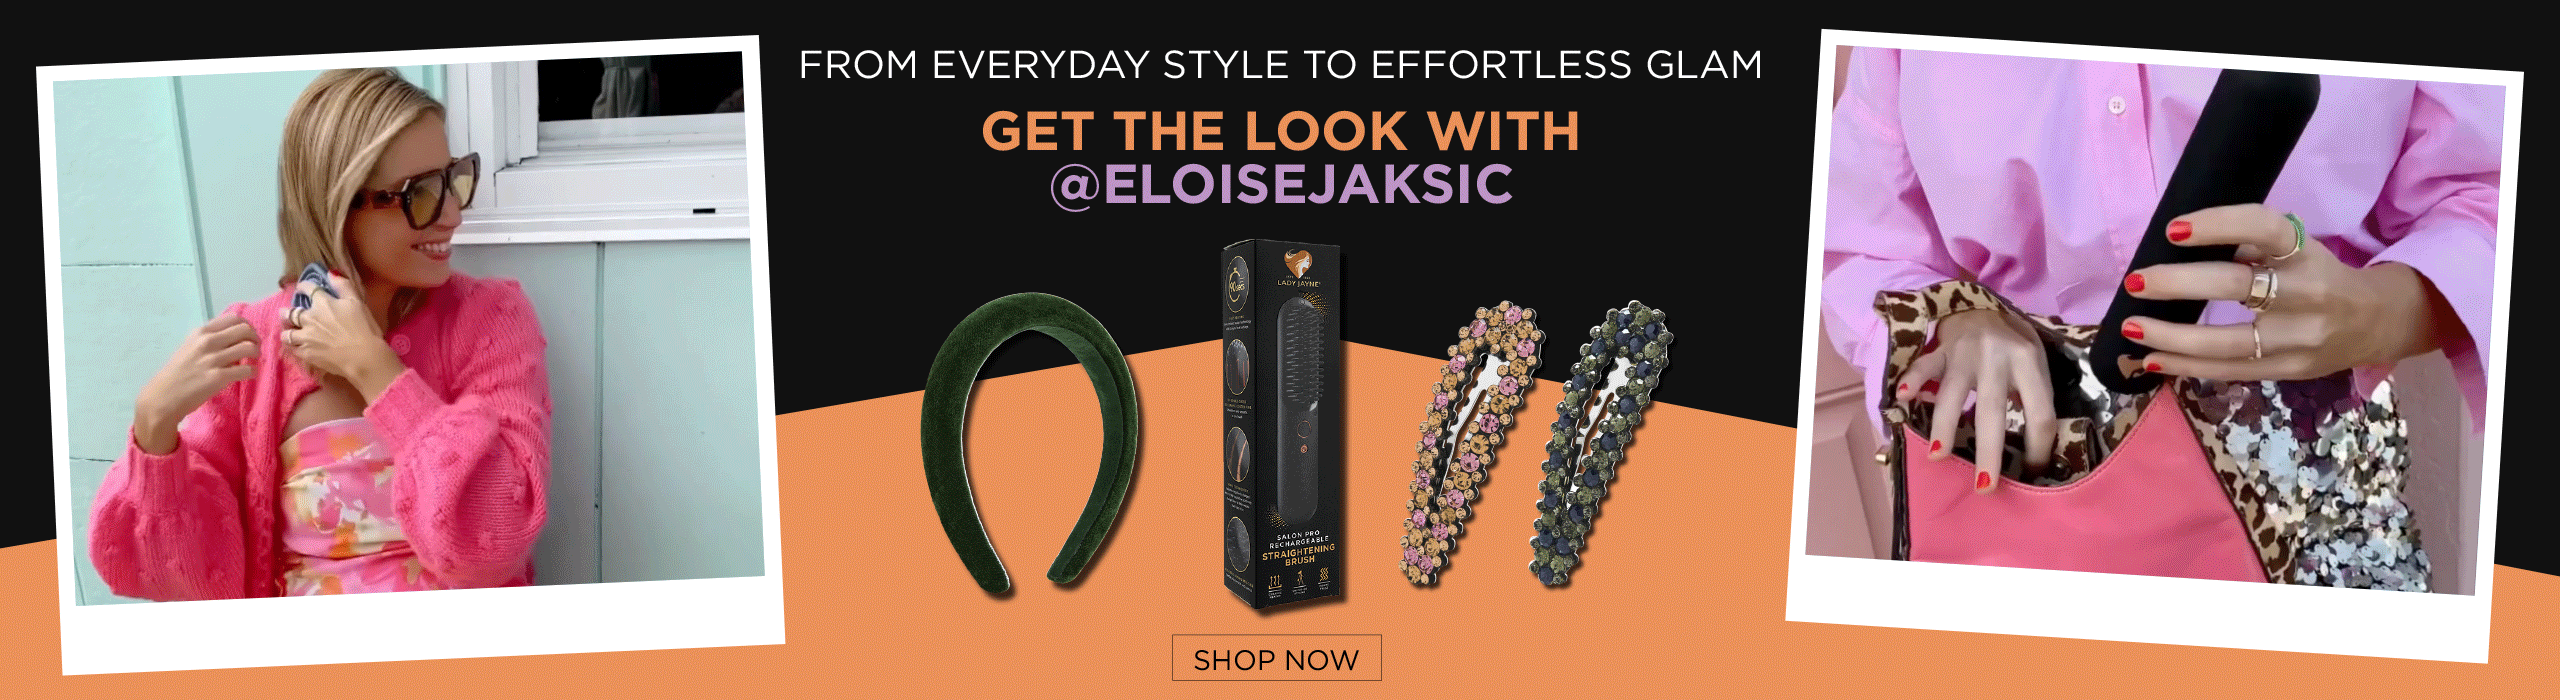 From Everyday Style to Effortless Glam